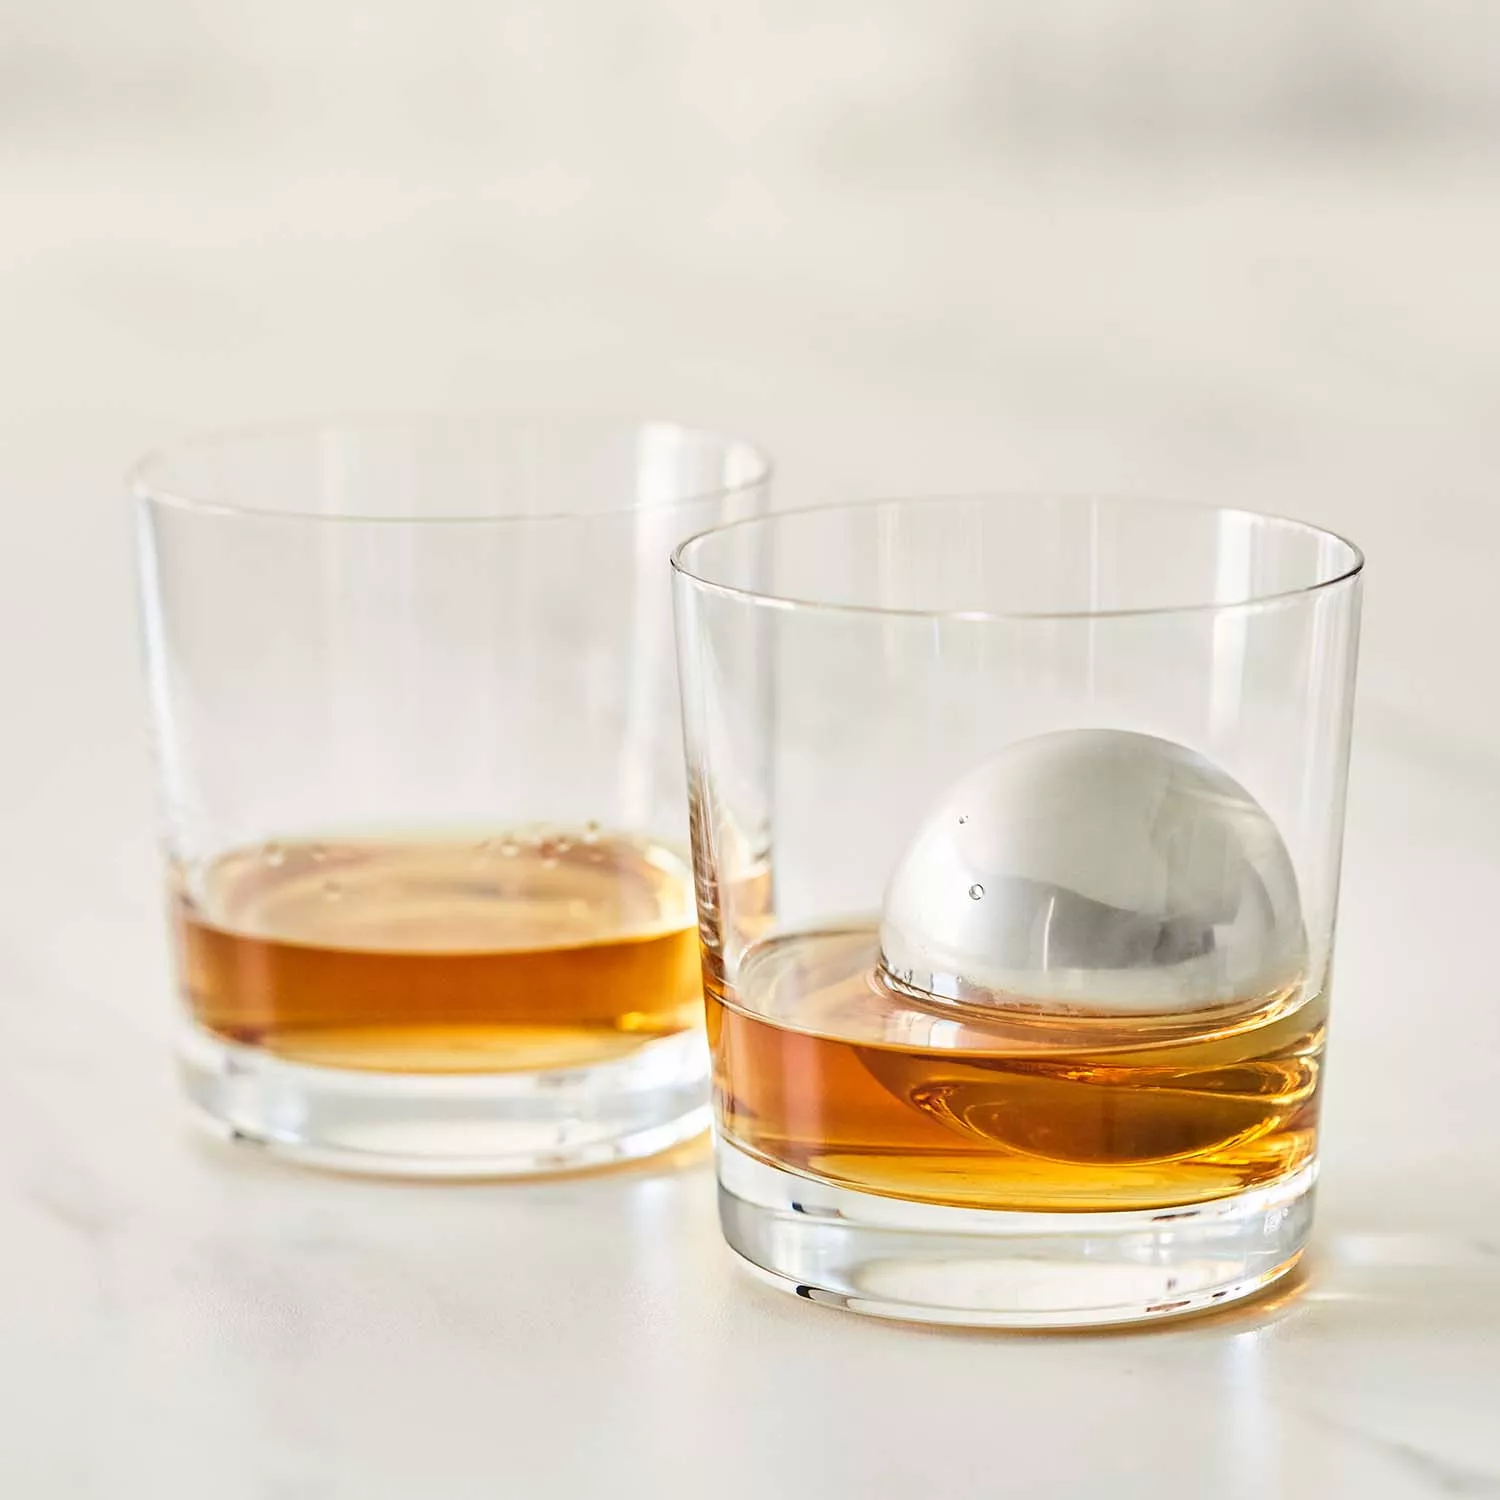 Use Sphere Ice Balls for the Best Whiskey Experience — Man Cave Resource